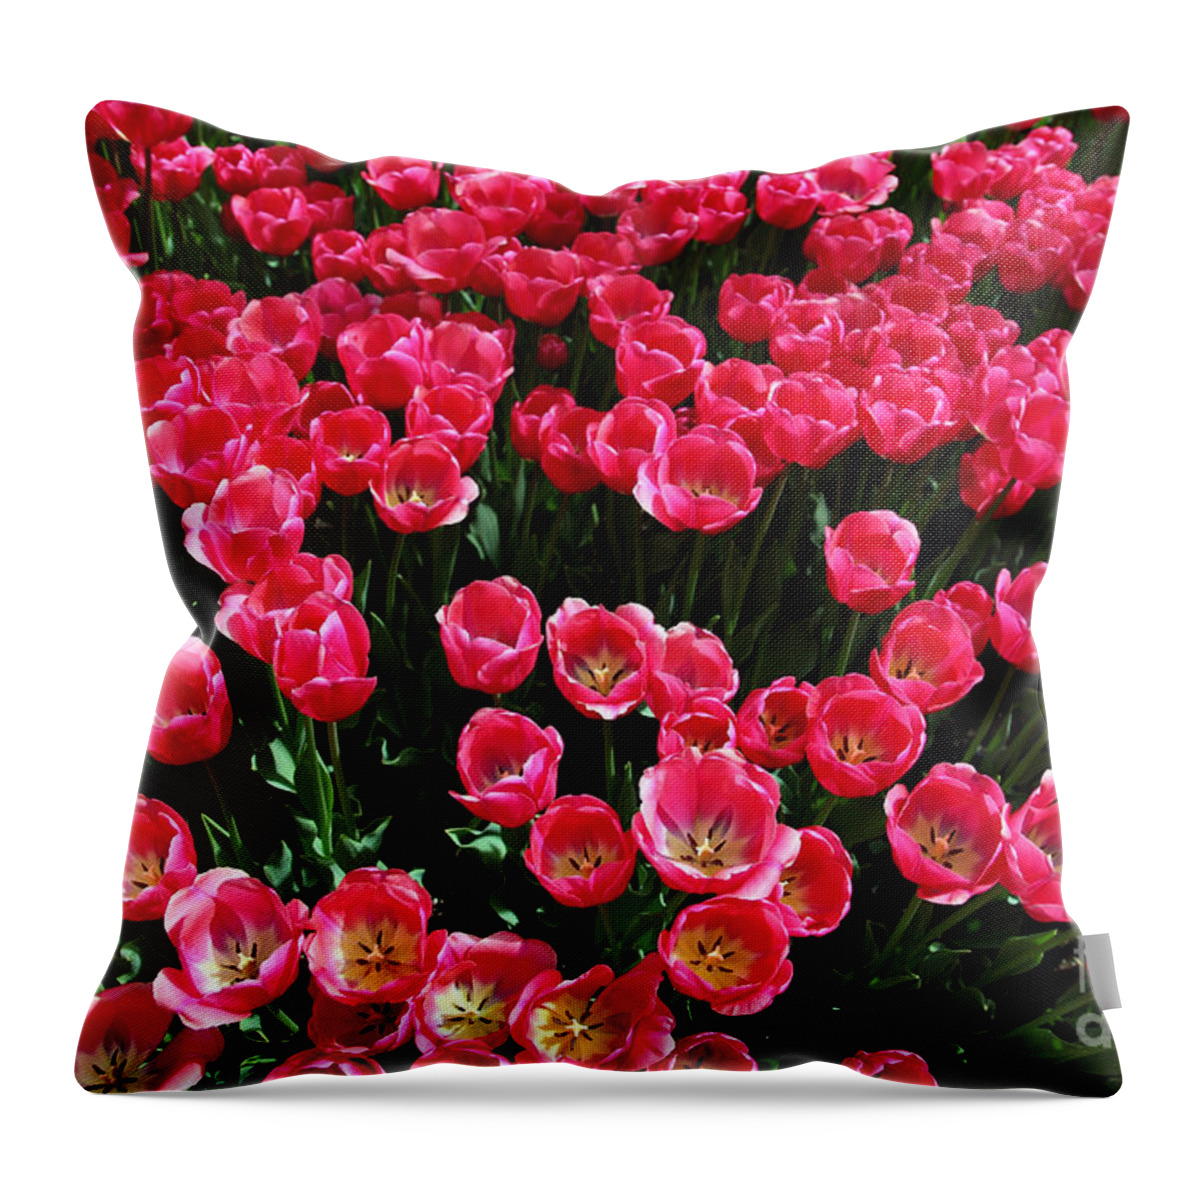 Tupils Throw Pillow featuring the photograph Tulips by Milena Boeva